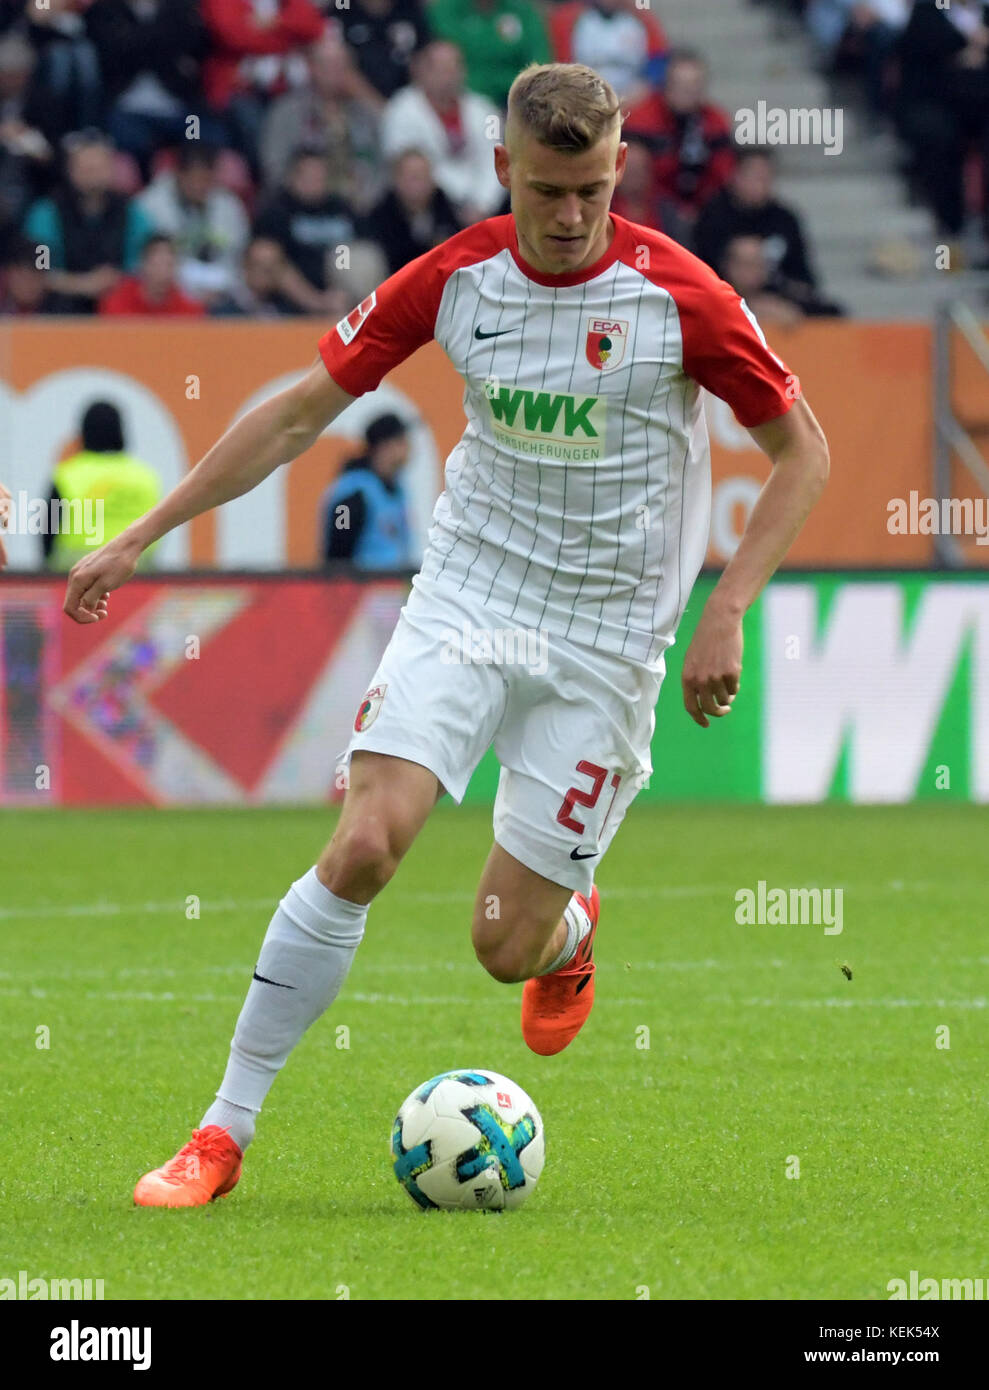 Augsburg, Germany. 21st Oct, 2017. Augsburg's Alfred Finnbogason in action during the German Bundesliga soccer match between FC Augsburg and Hanover 96 at the WWK Arena in Augsburg, Germany, 21 October 2017. Credit: Stefan Puchner/dpa/Alamy Live News Stock Photo